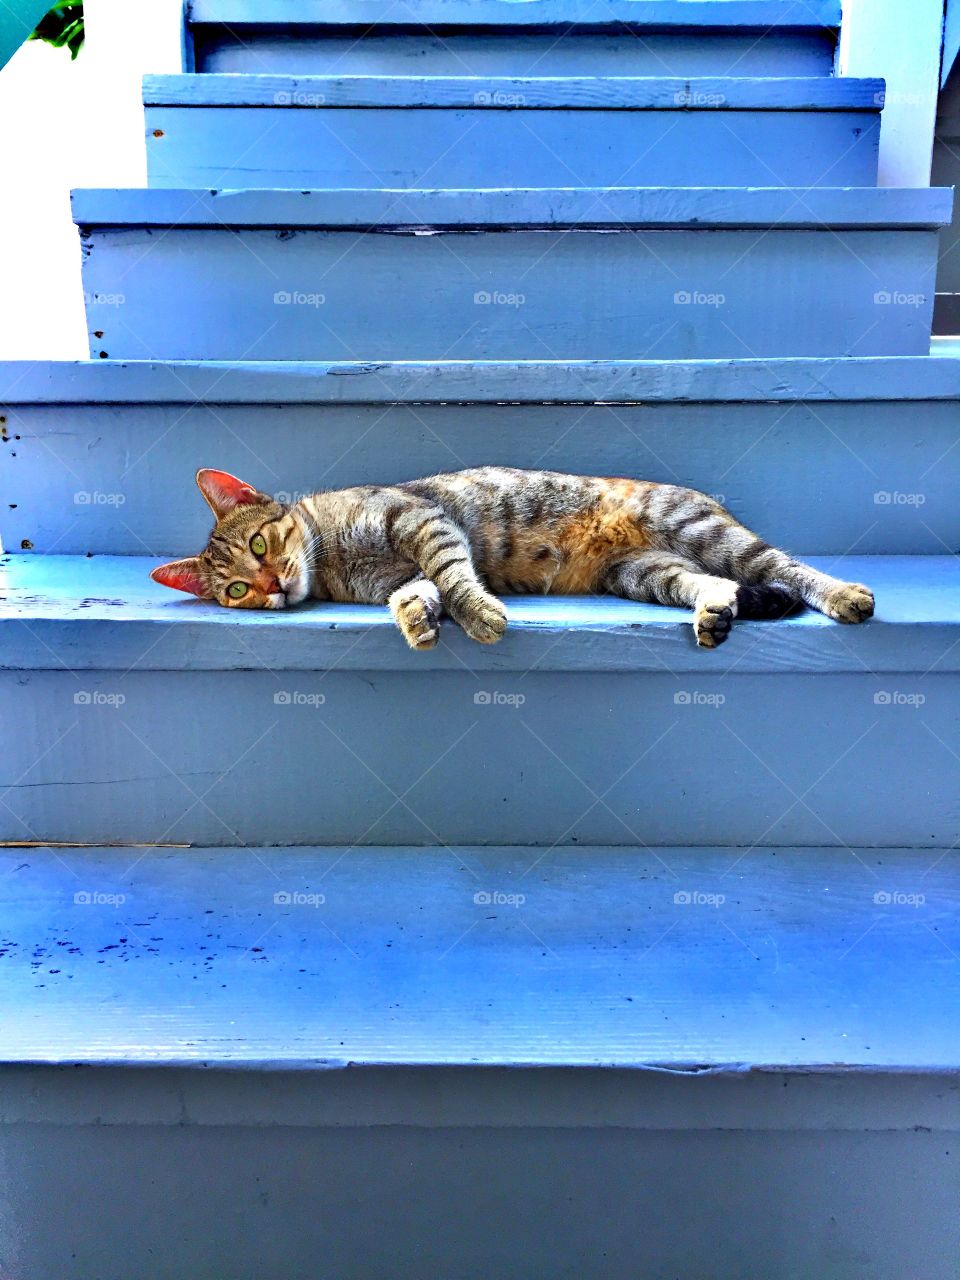 Cat On Stairs, Lazy Cat, Lazy Cat Sleeping On The Stairs, Rectangles On Stairs, Island Cat Relaxing